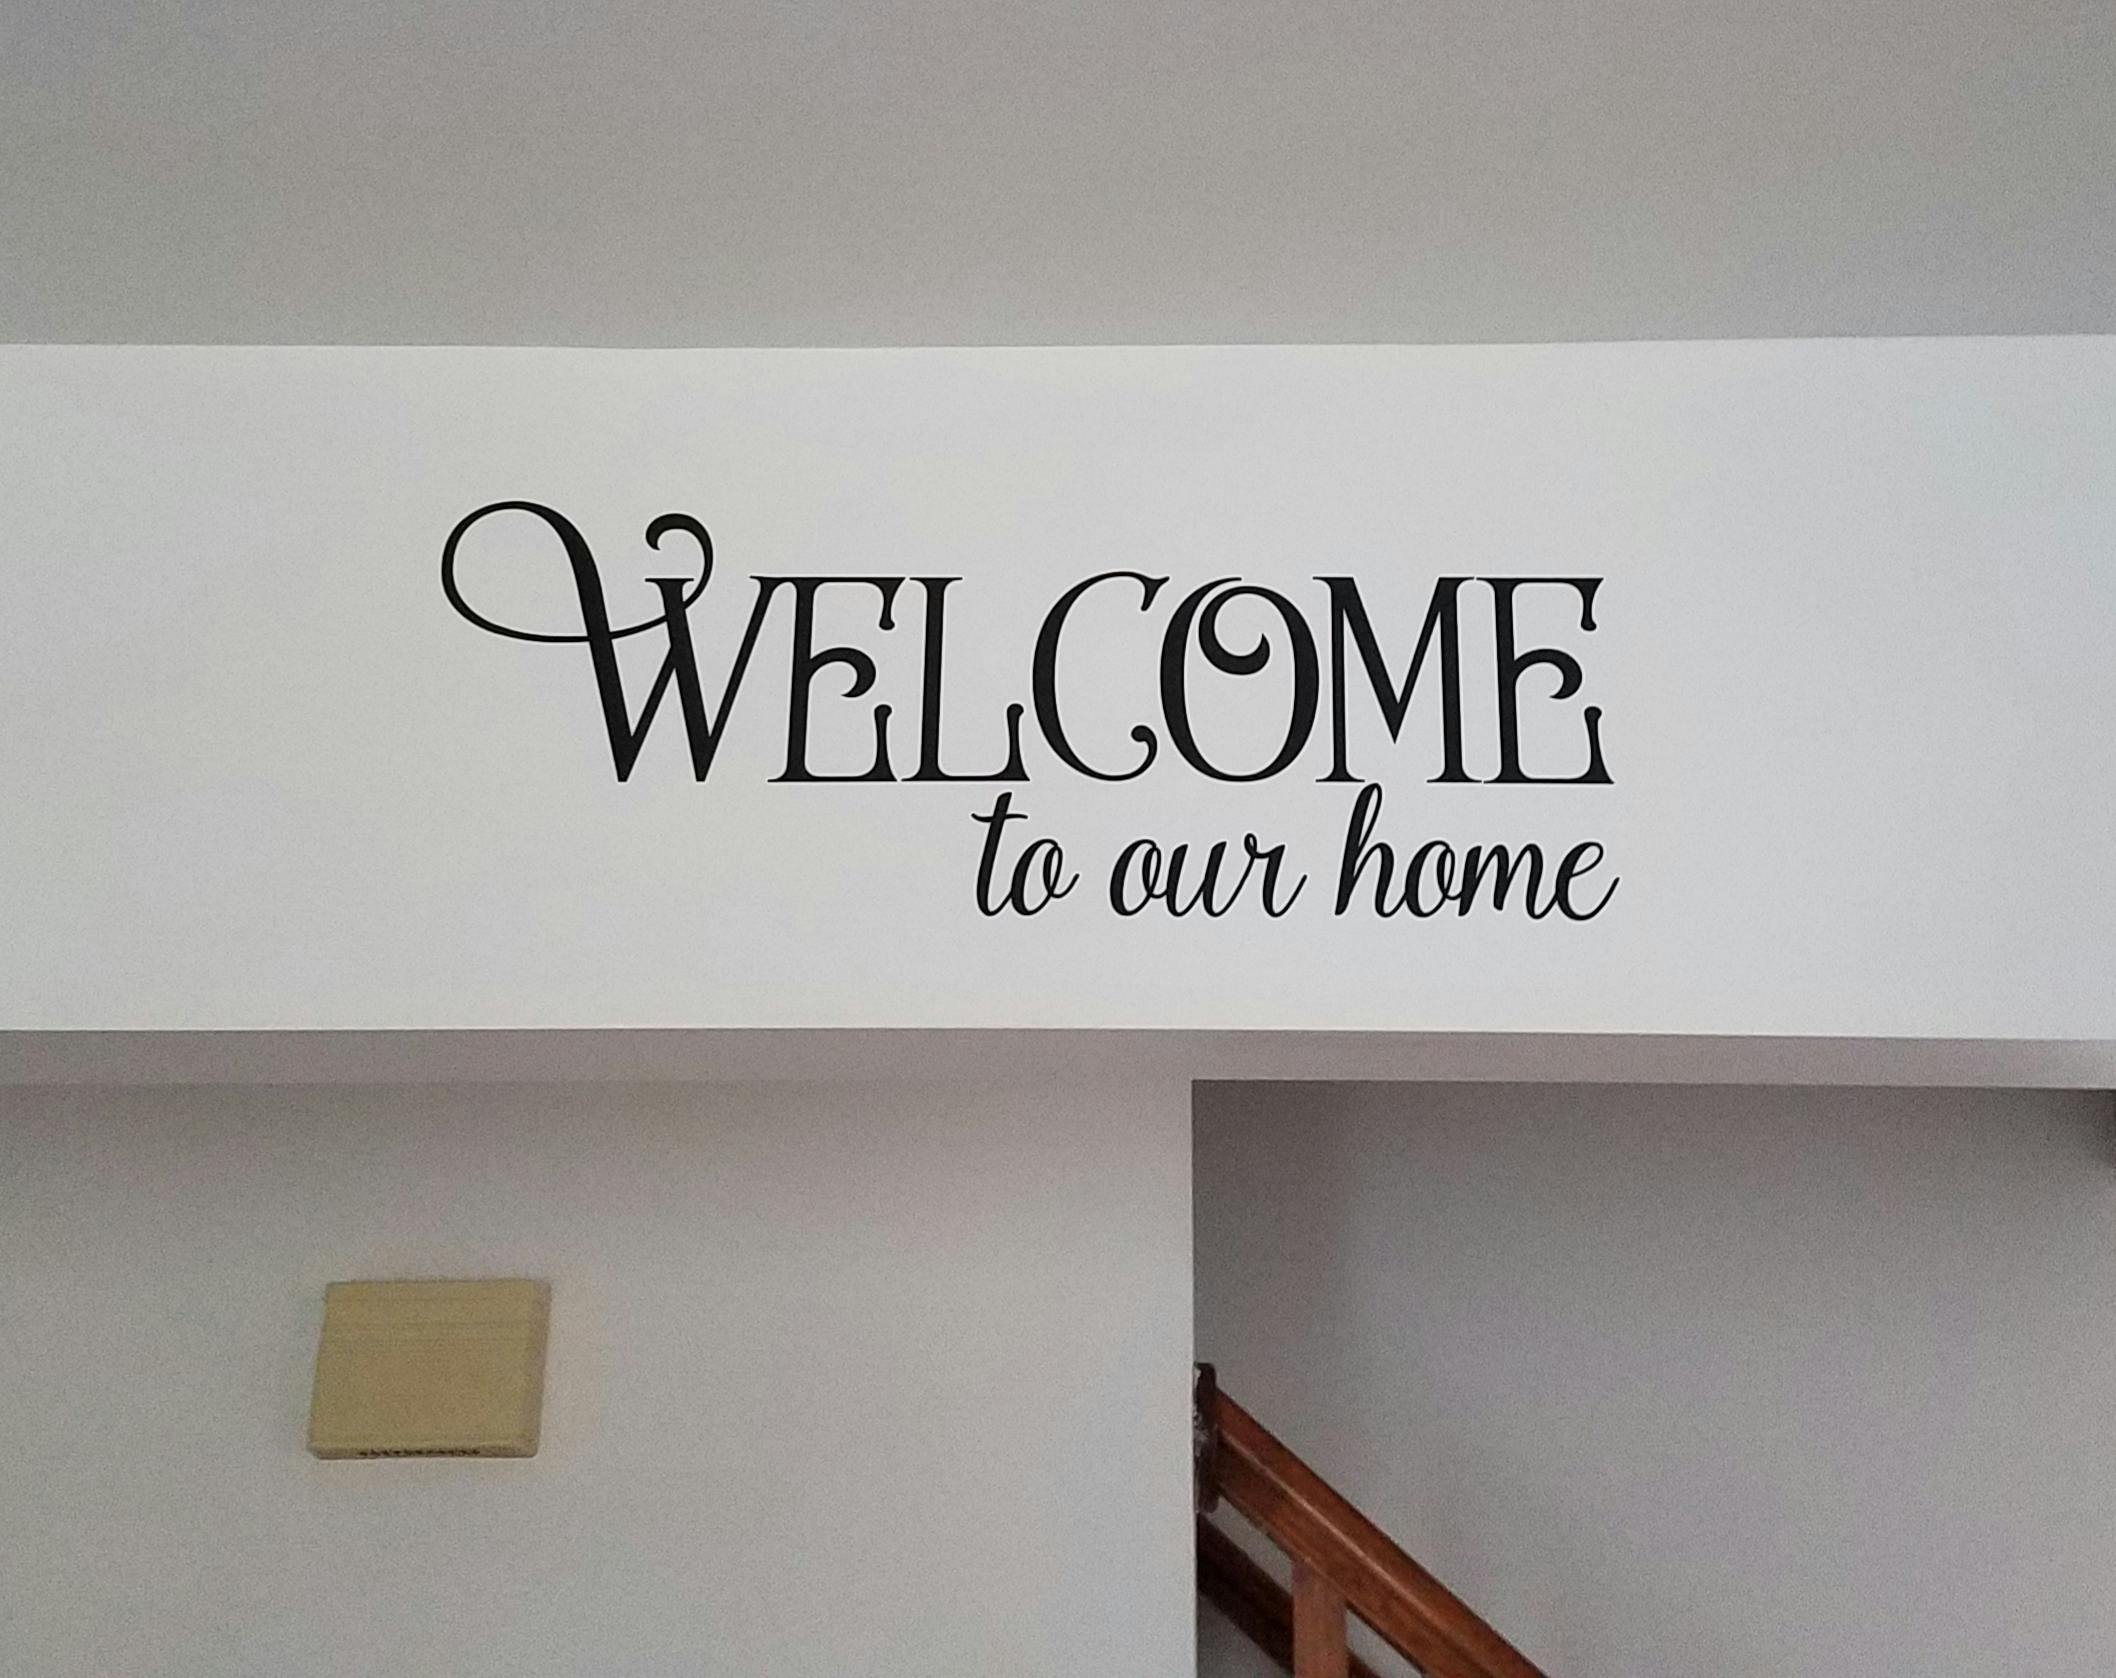 Welcome to our home walls windows wood  vinyl decal sticker f36